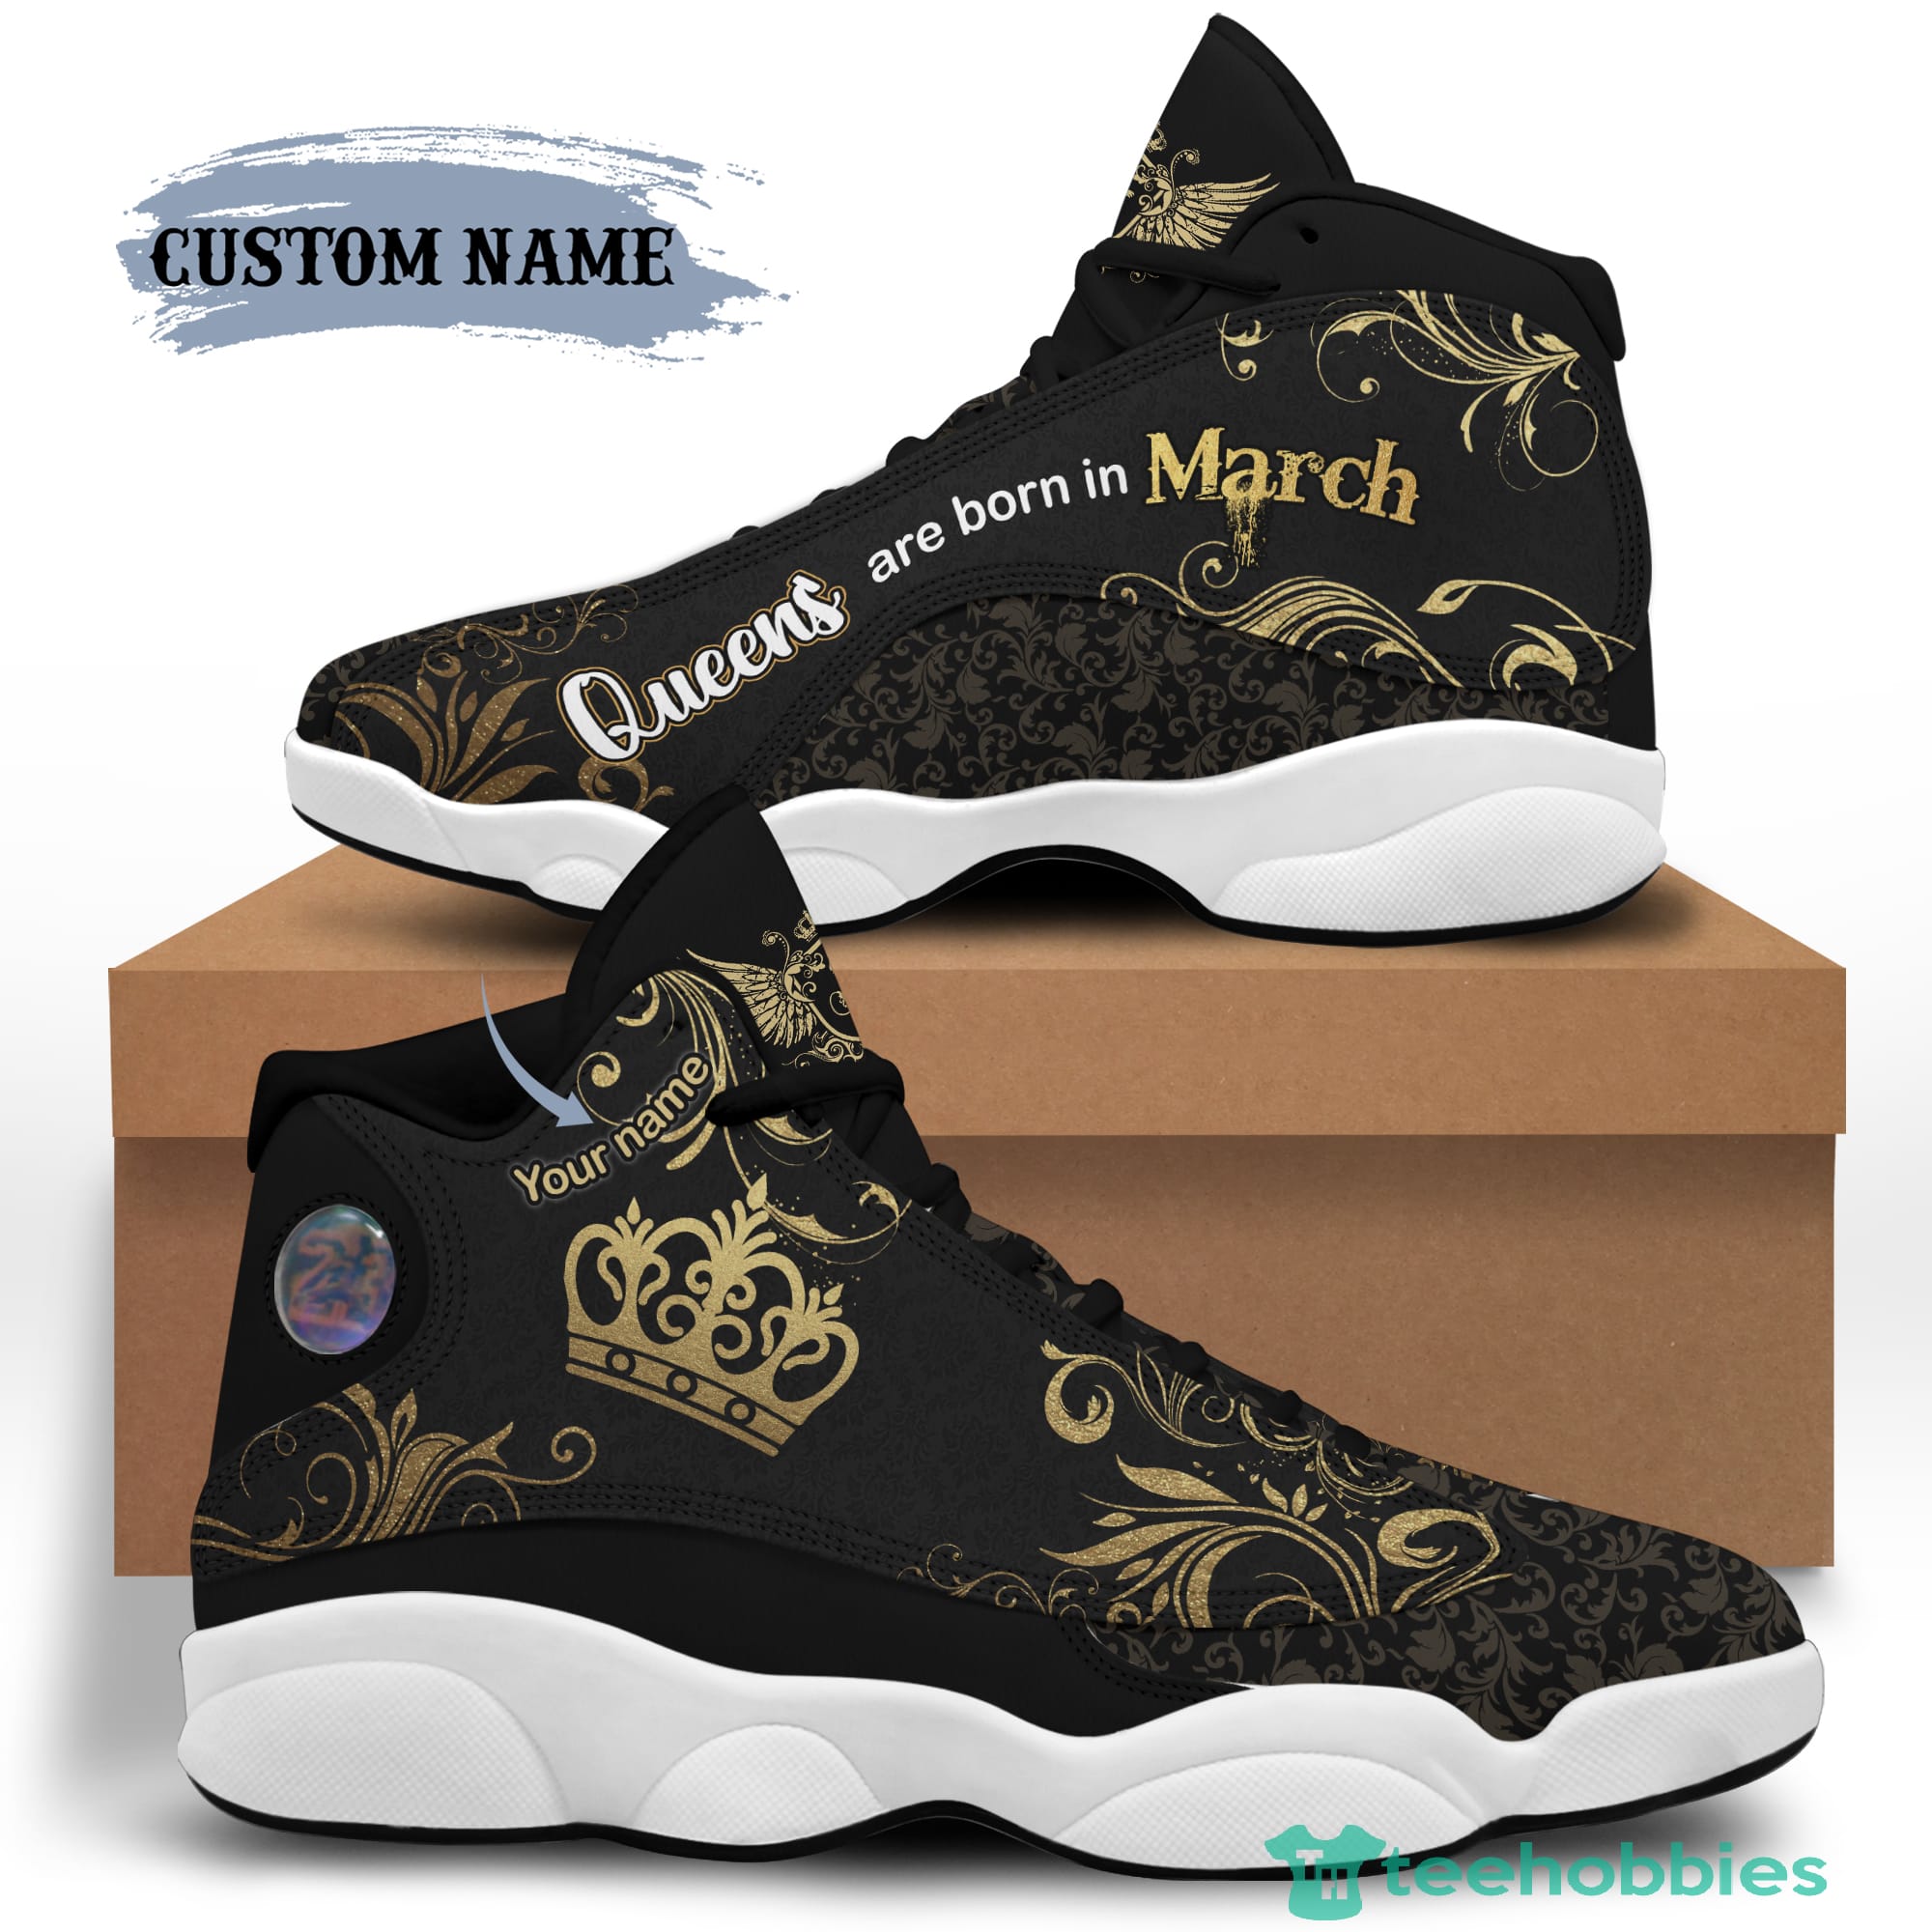 March Queen Birthday Gift Personalized Name Air Jordan 13 Shoes 98